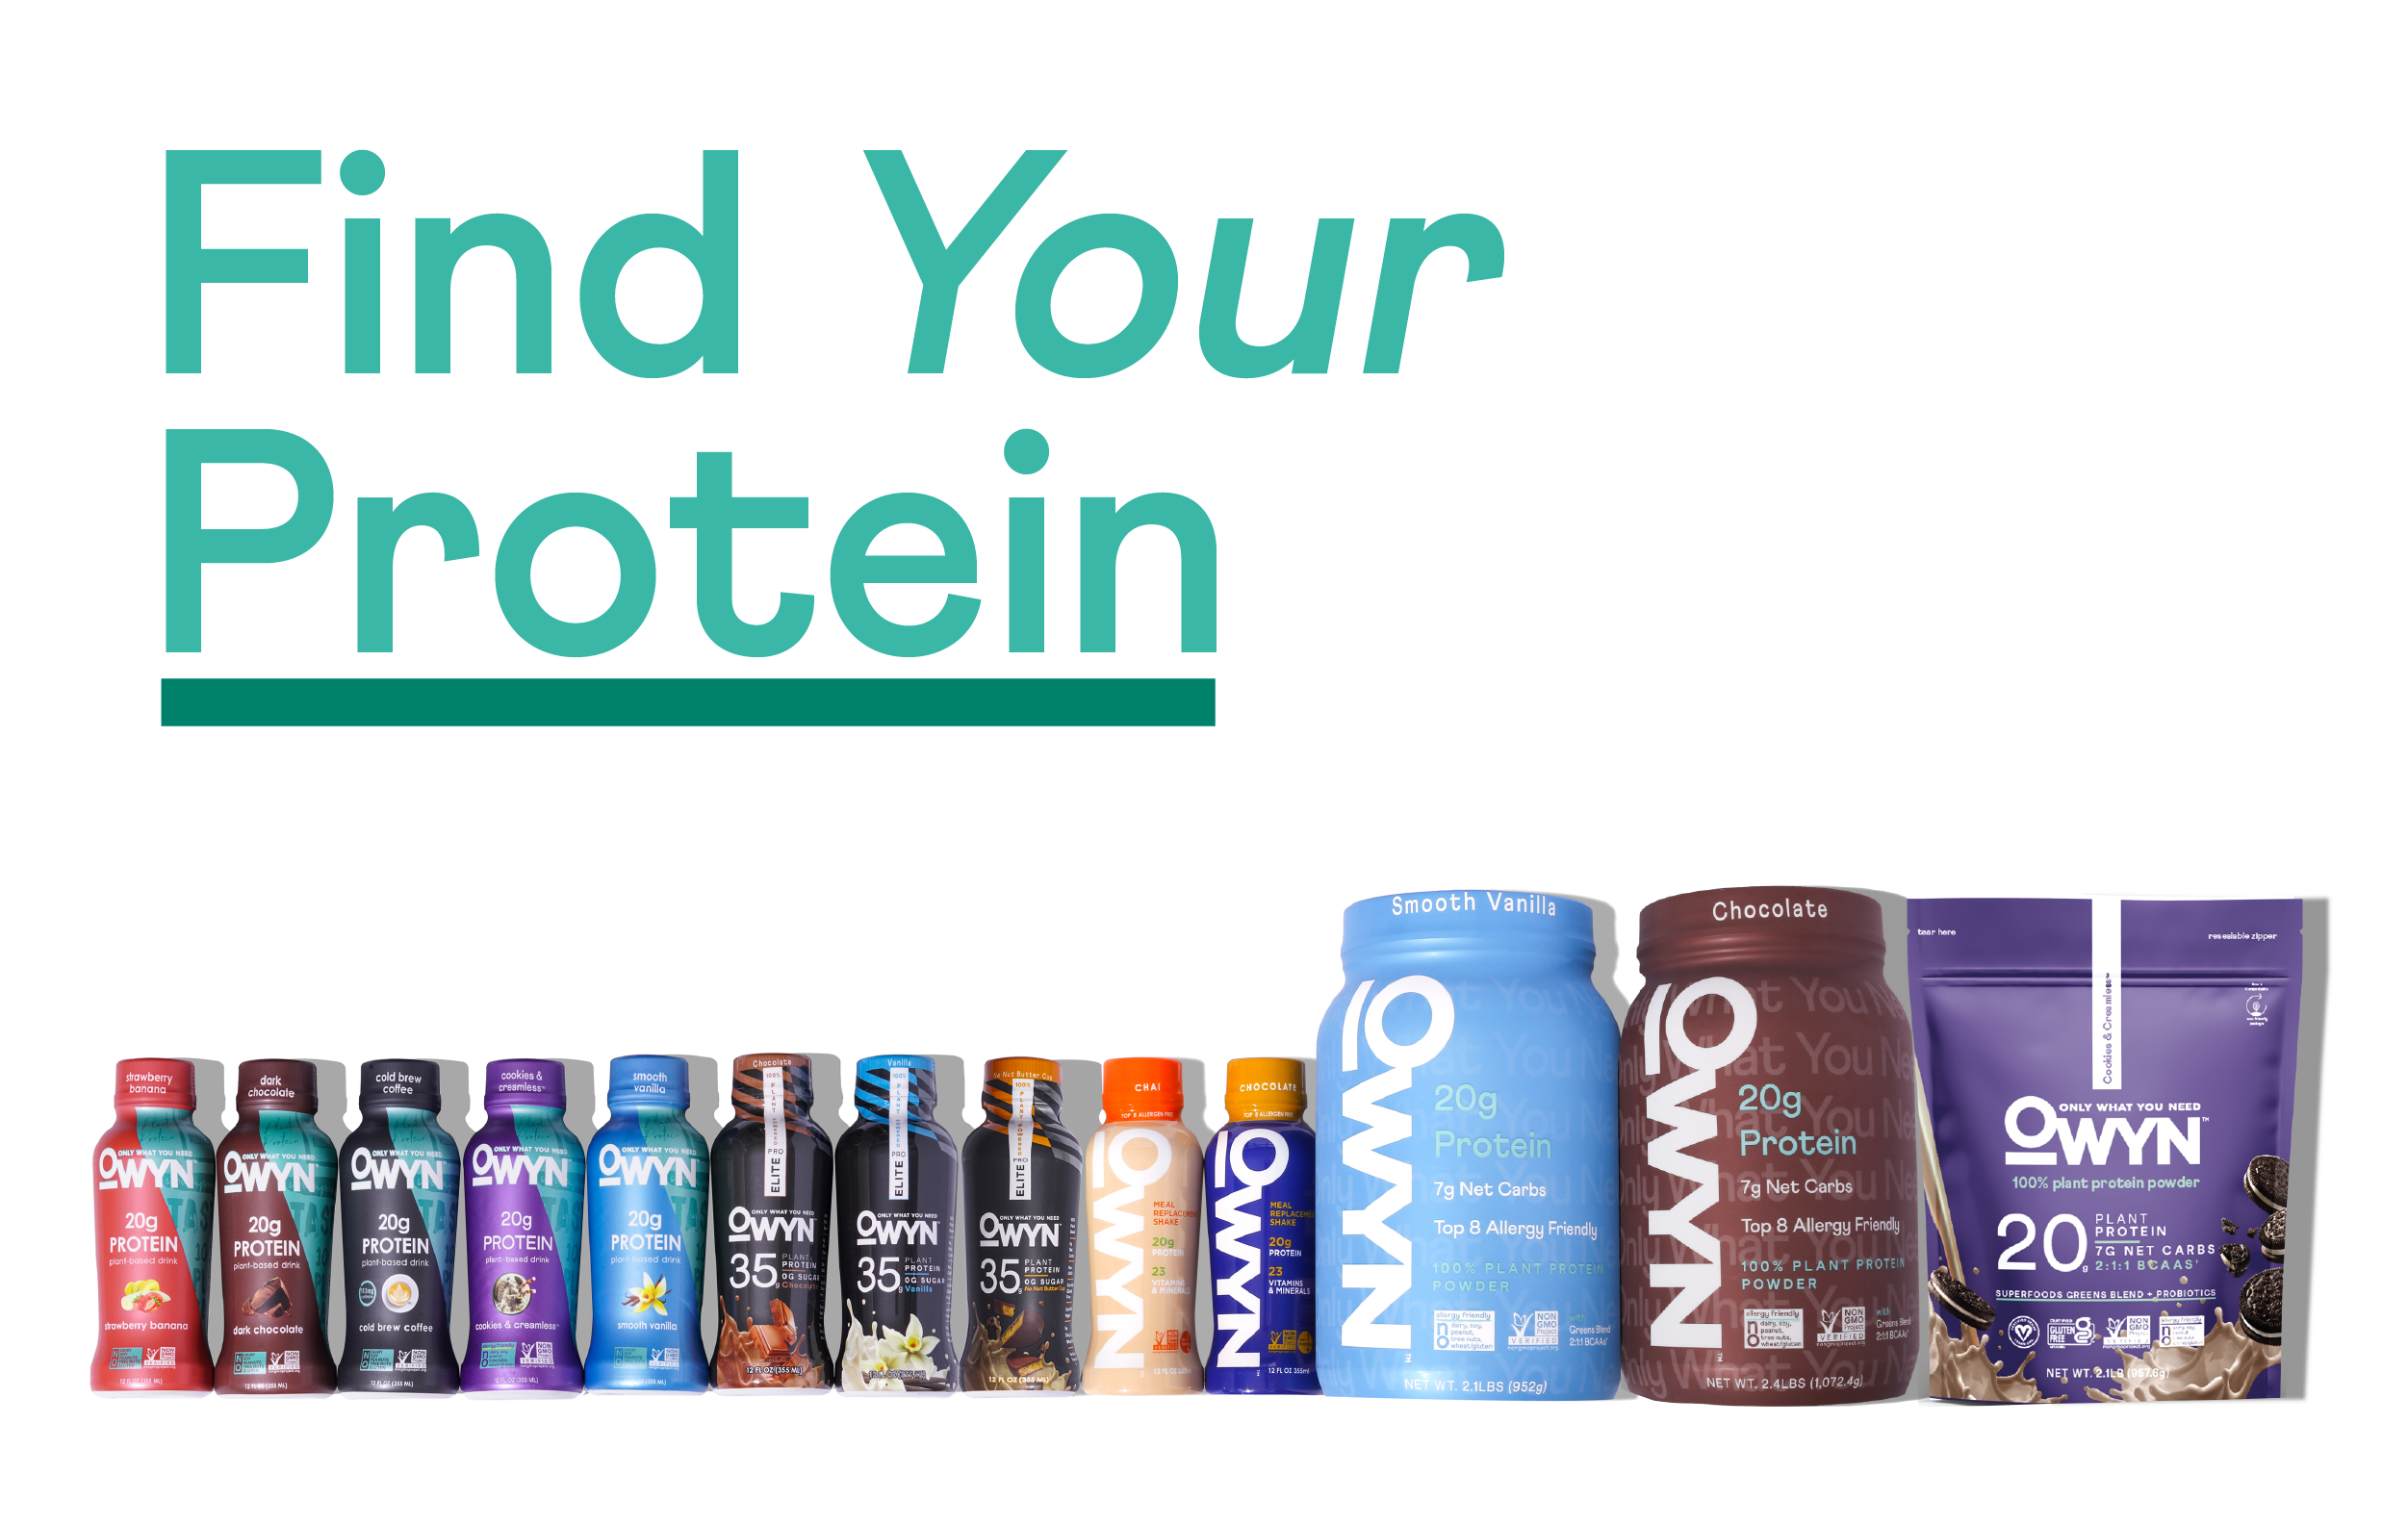 Not All Protein is Created Equal.